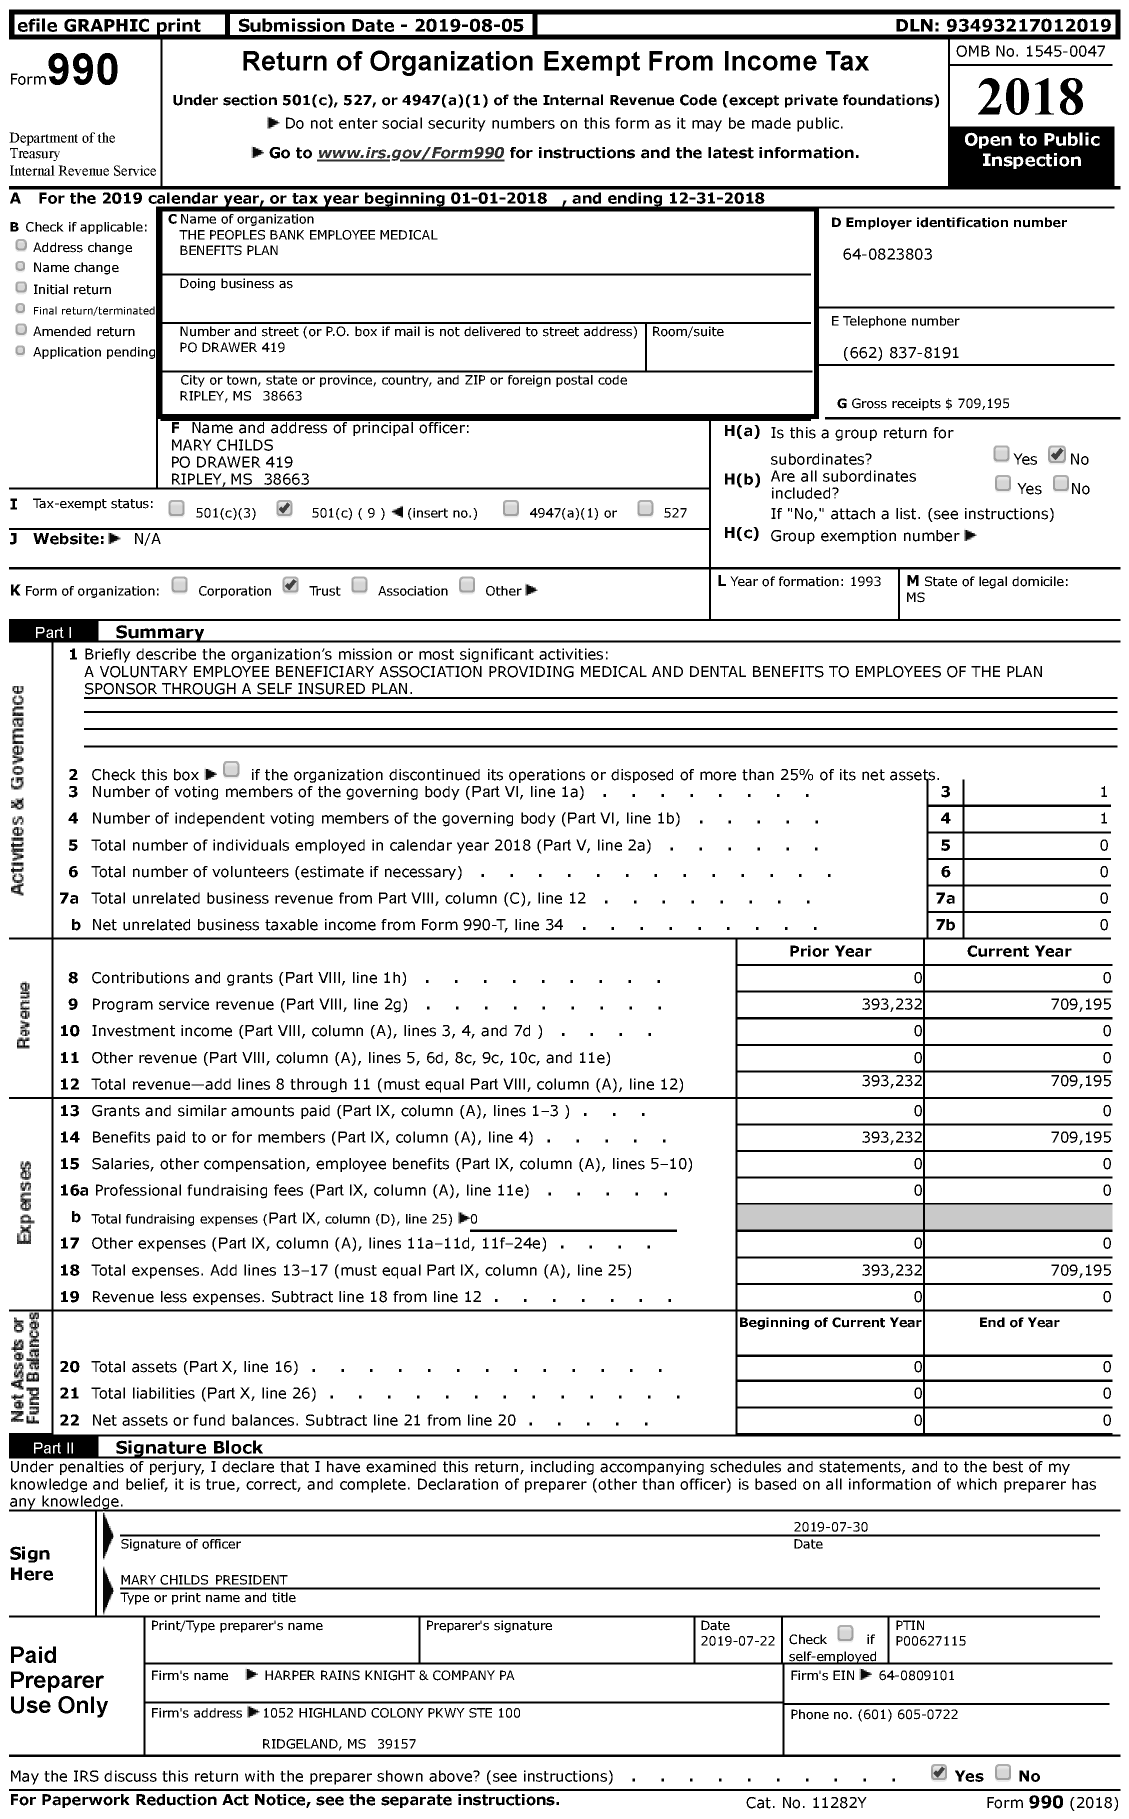 Image of first page of 2018 Form 990 for The Peoples Bank Employee Medical Benefits Plan